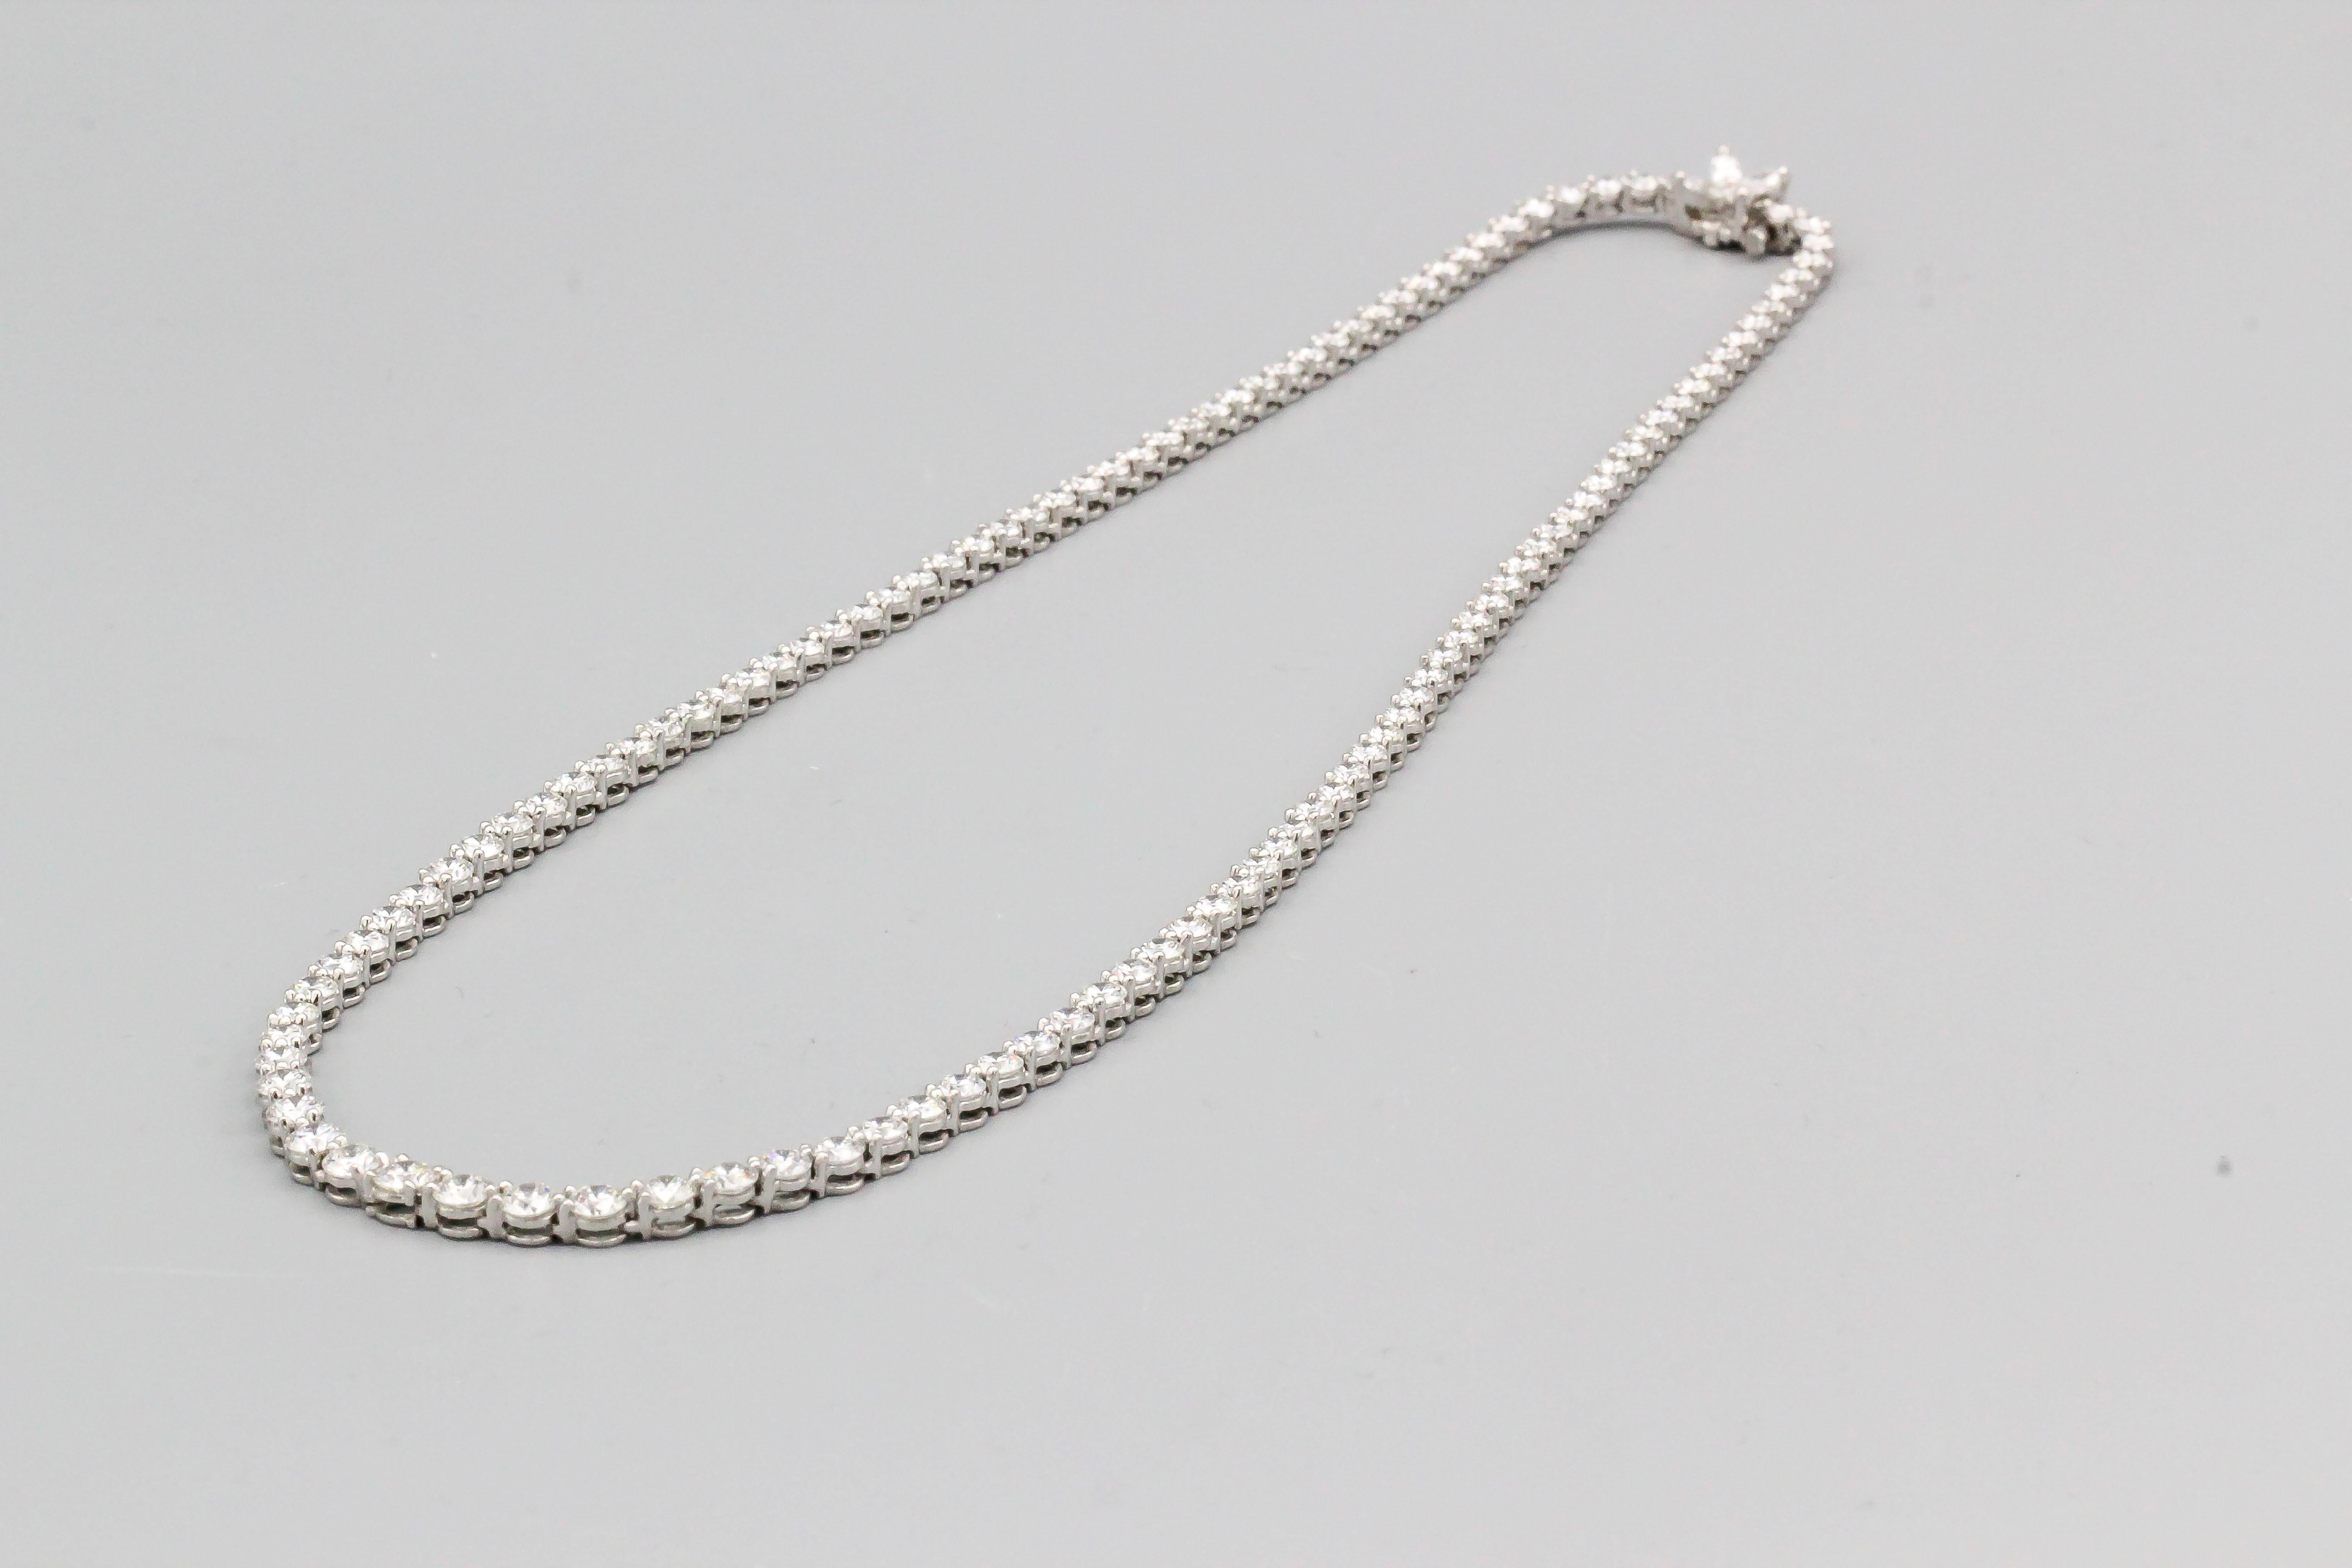 Elegant graduated line necklace of diamonds and set in platinum, from the 